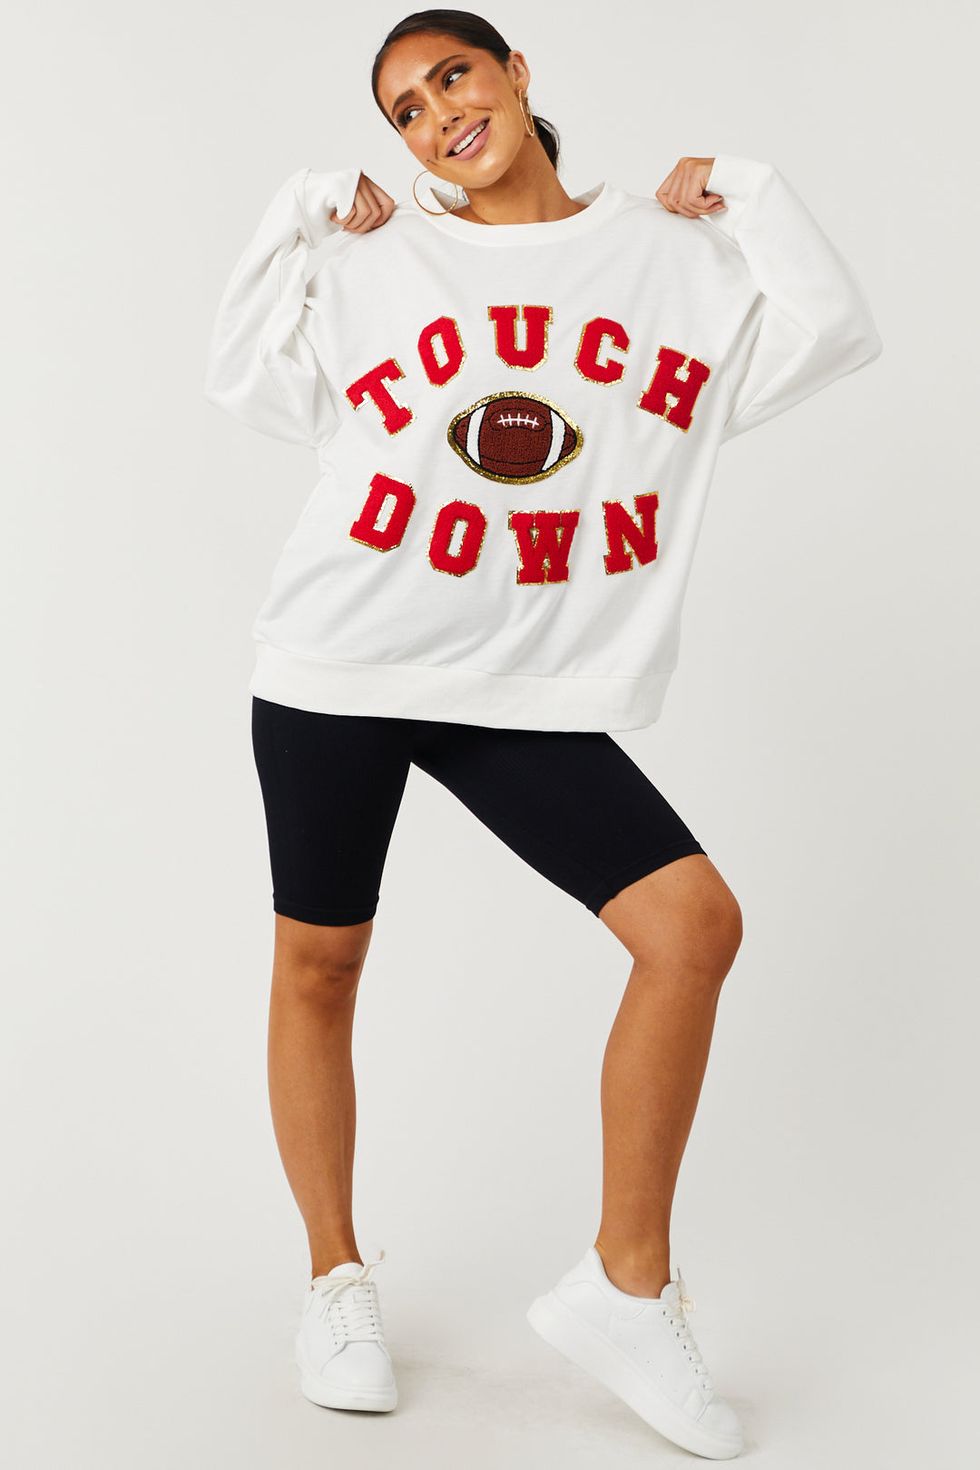 6 Outfit Ideas for Your Next Football Game